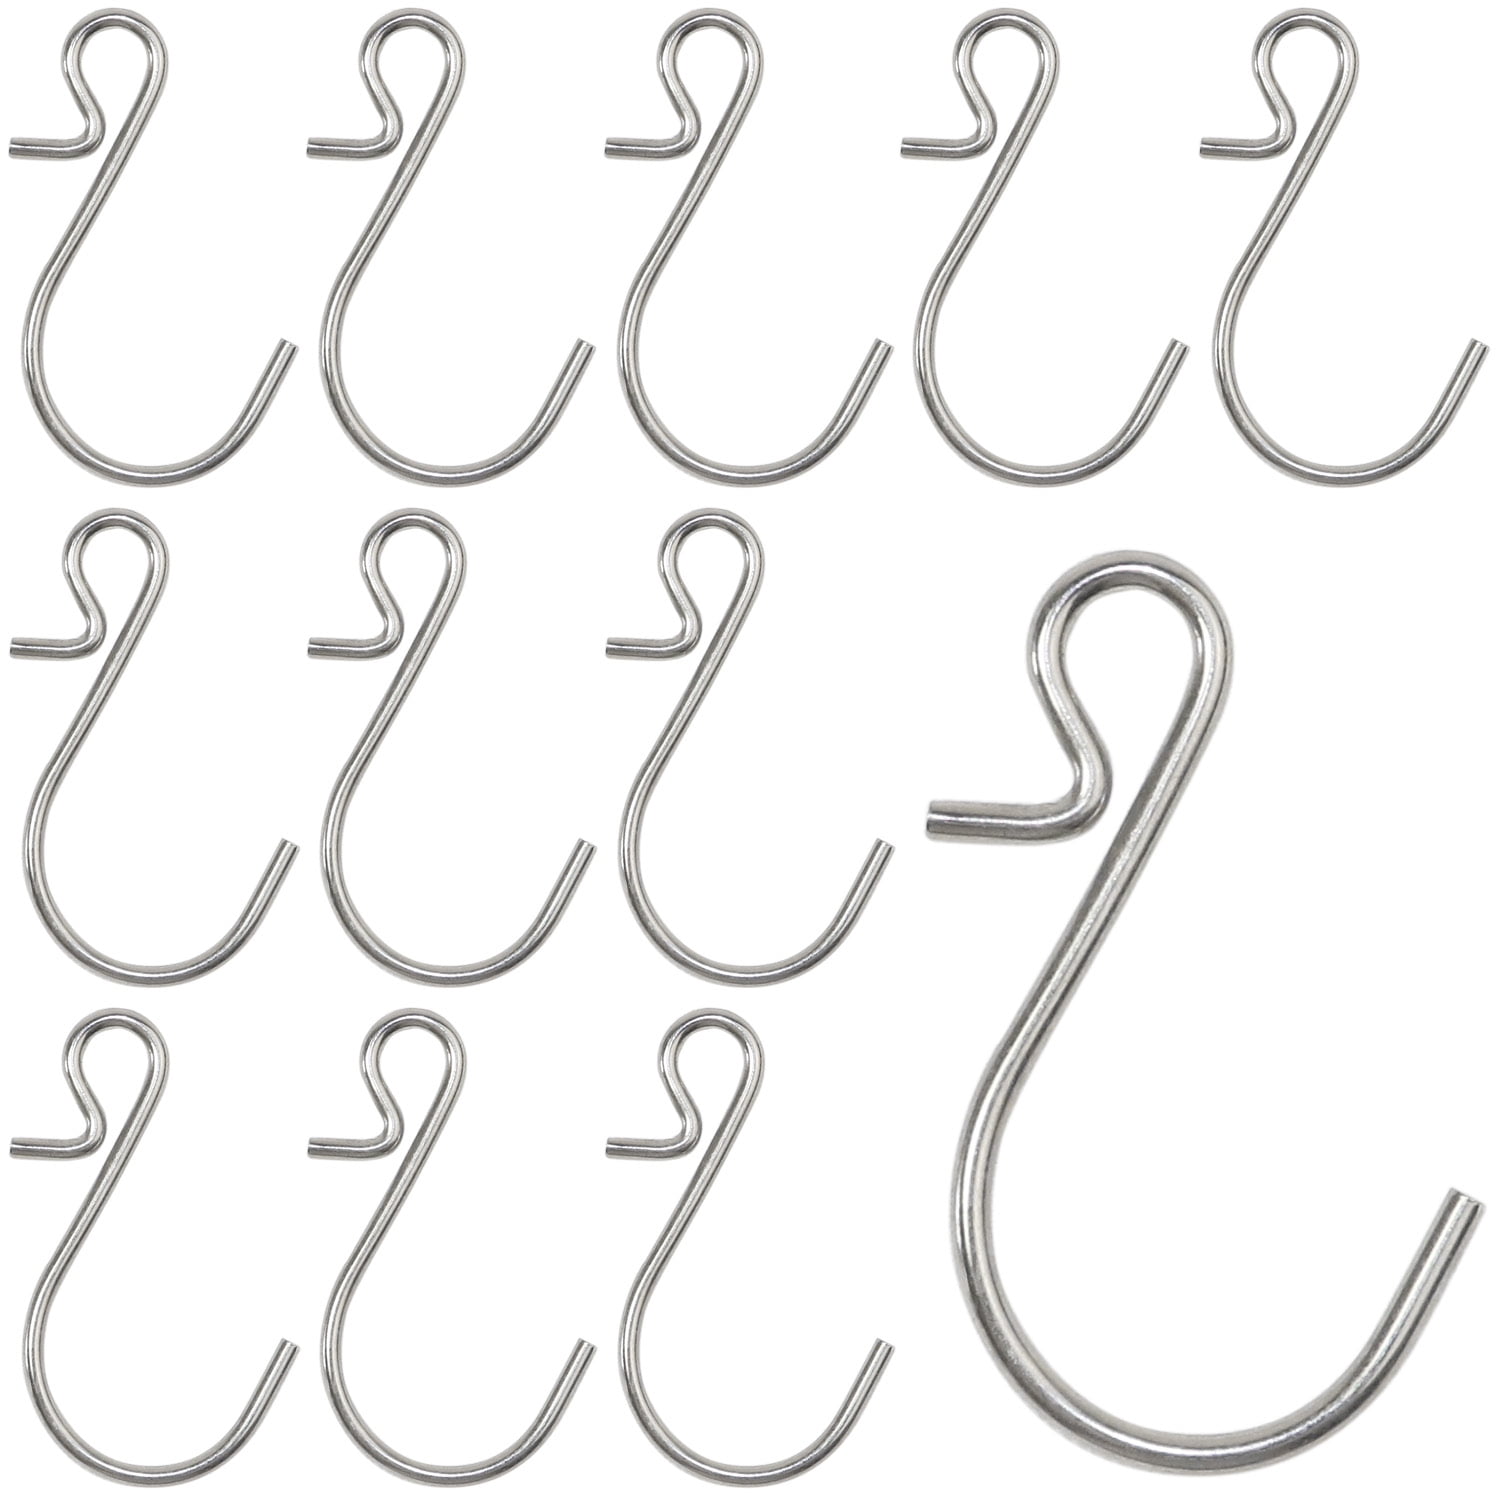 35pcs Small S Hooks Connectors Metal S Shaped Wire Hook Hangers